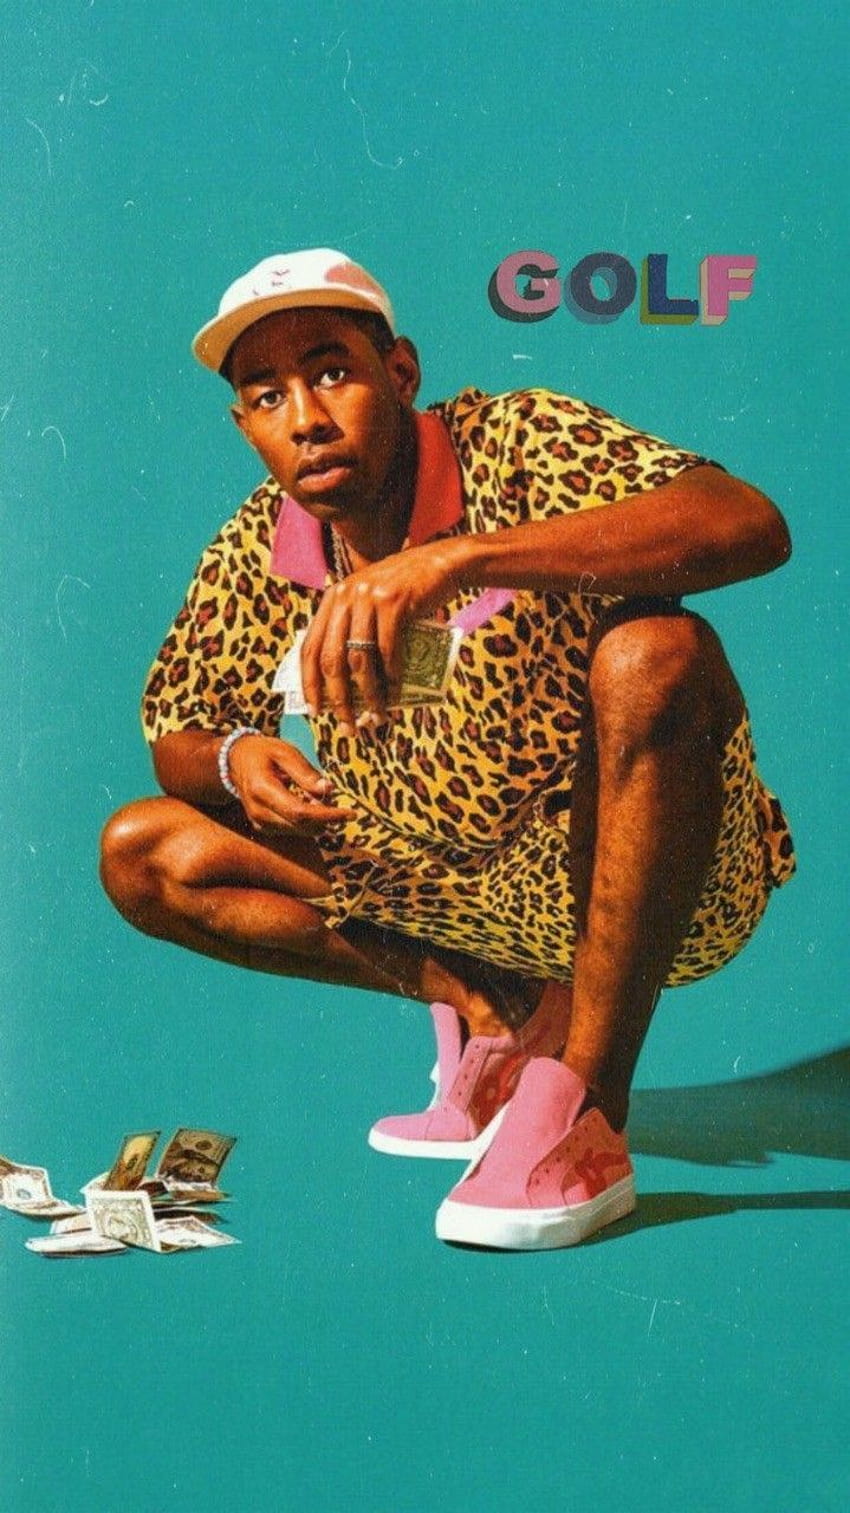 aesthetic tyler the creator outfits